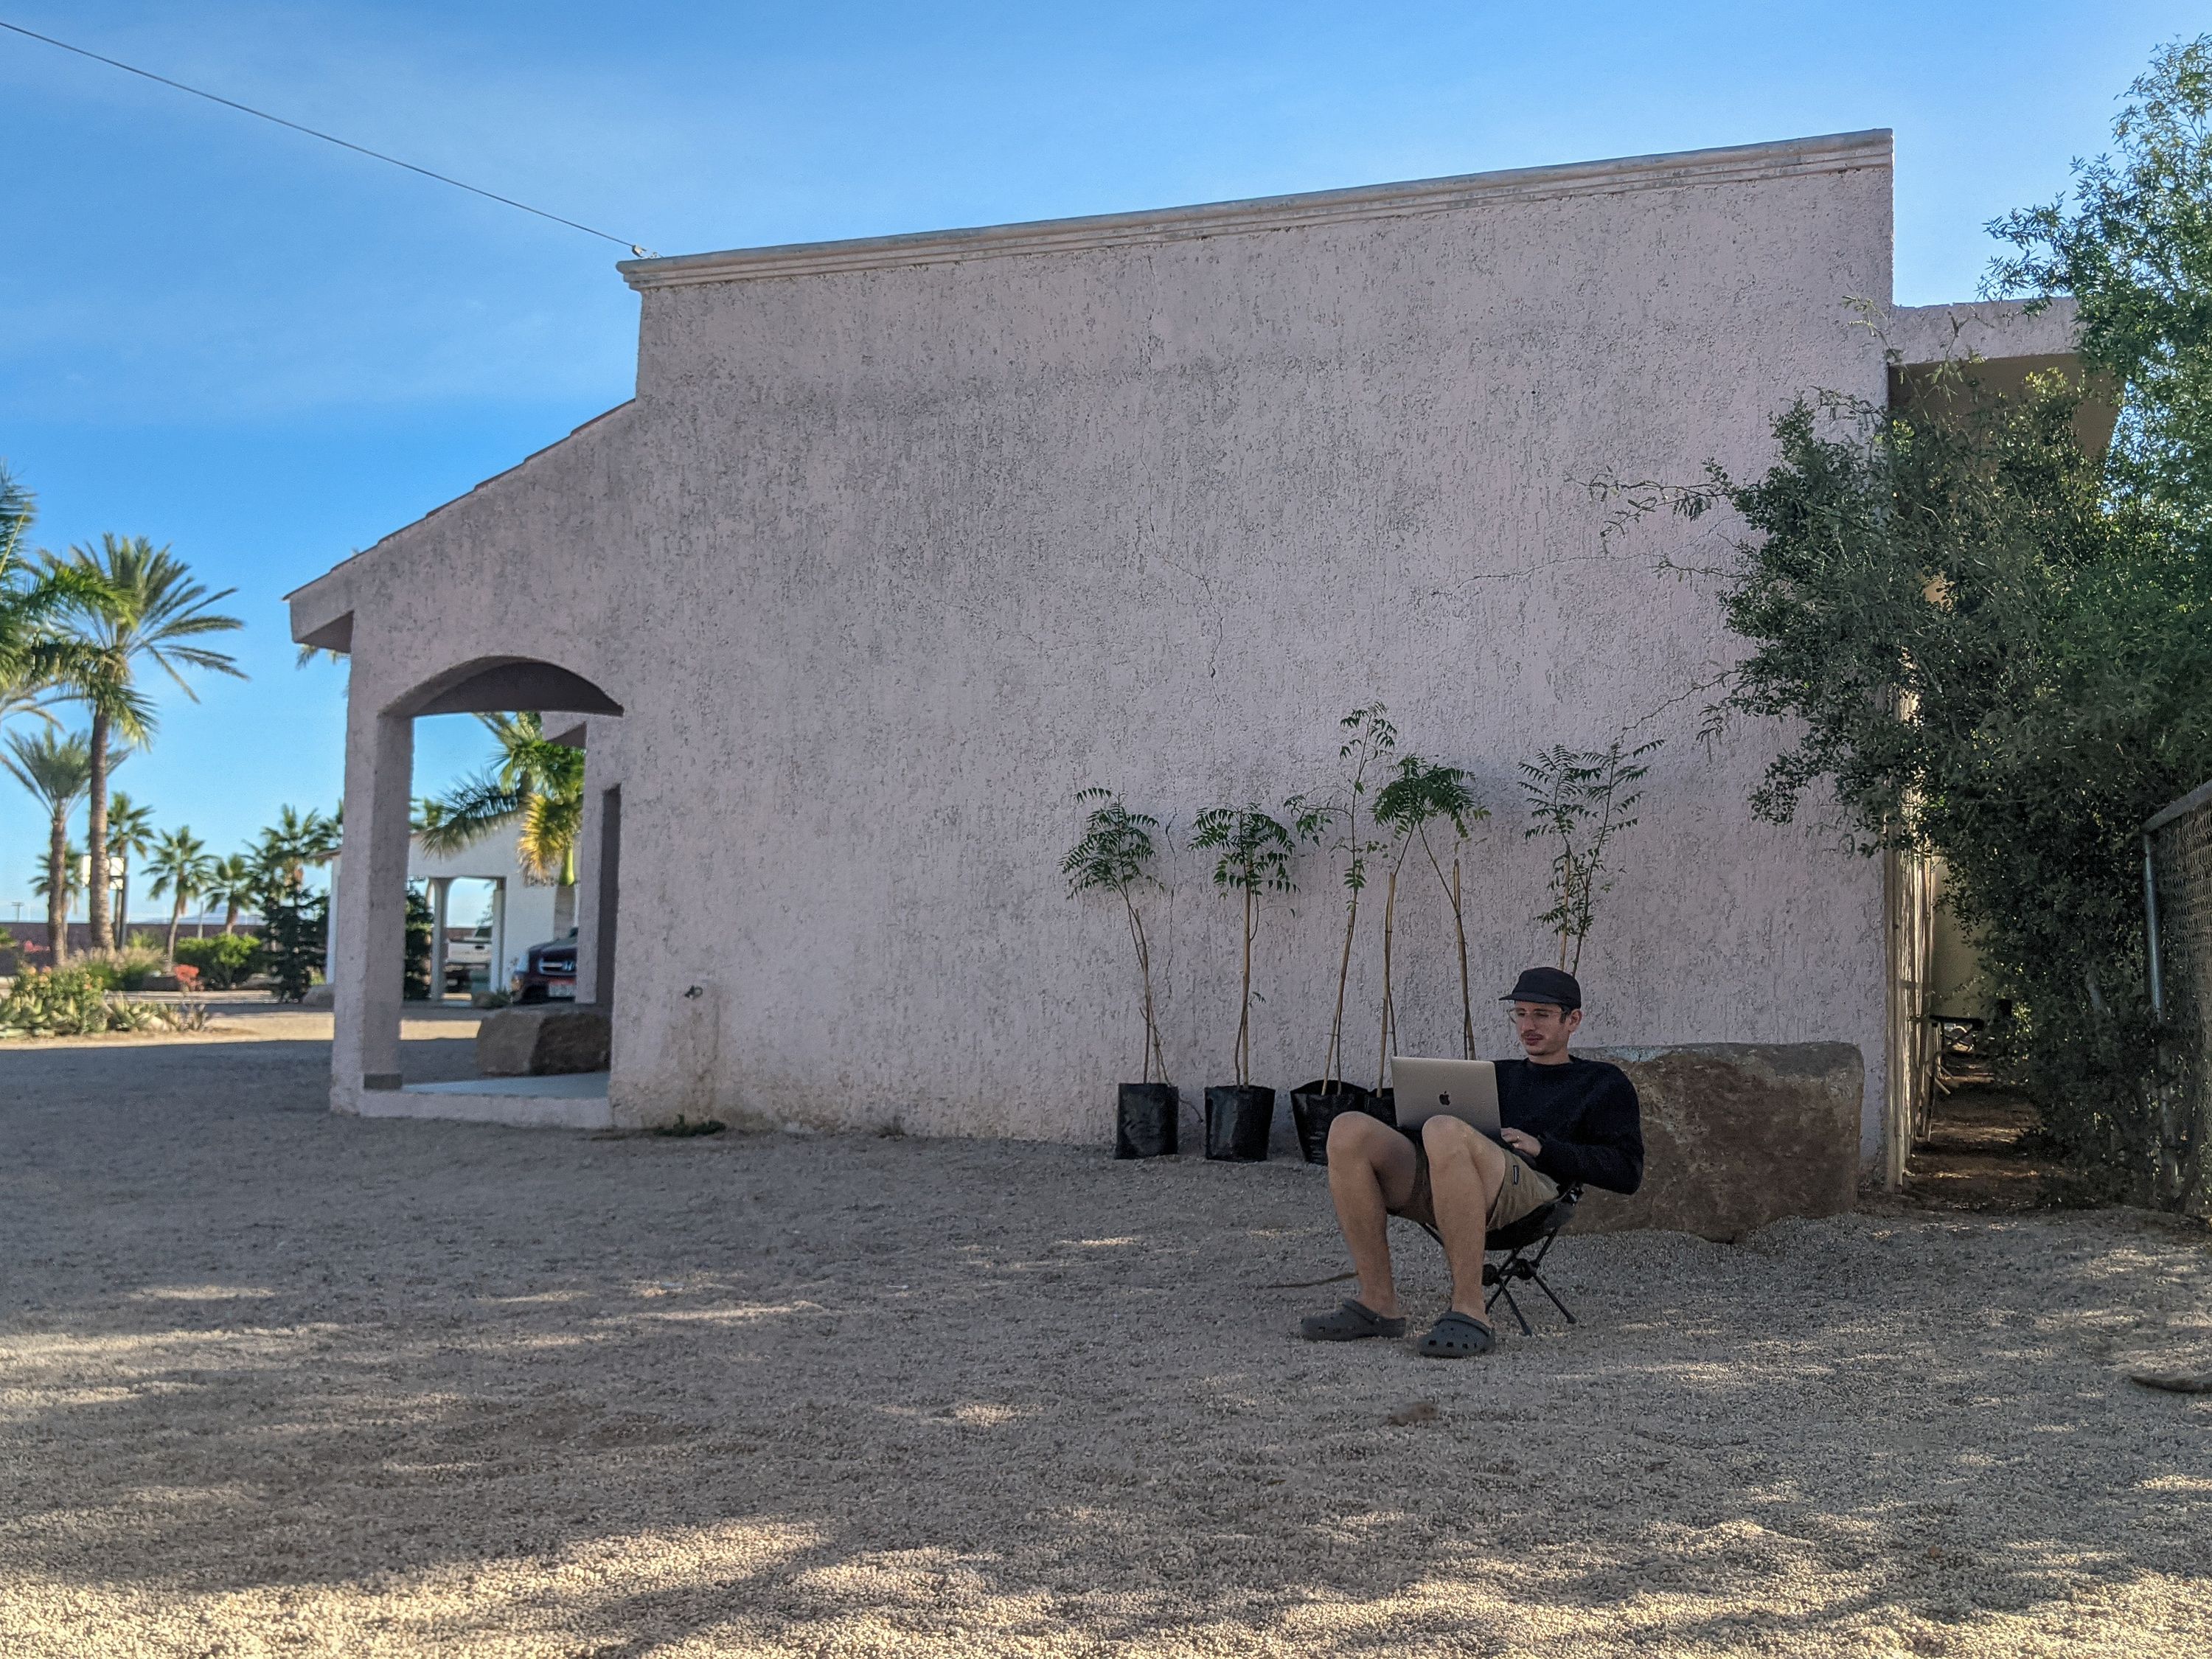 Victor working on our blog post in the shade of the little casita next to our camp spot